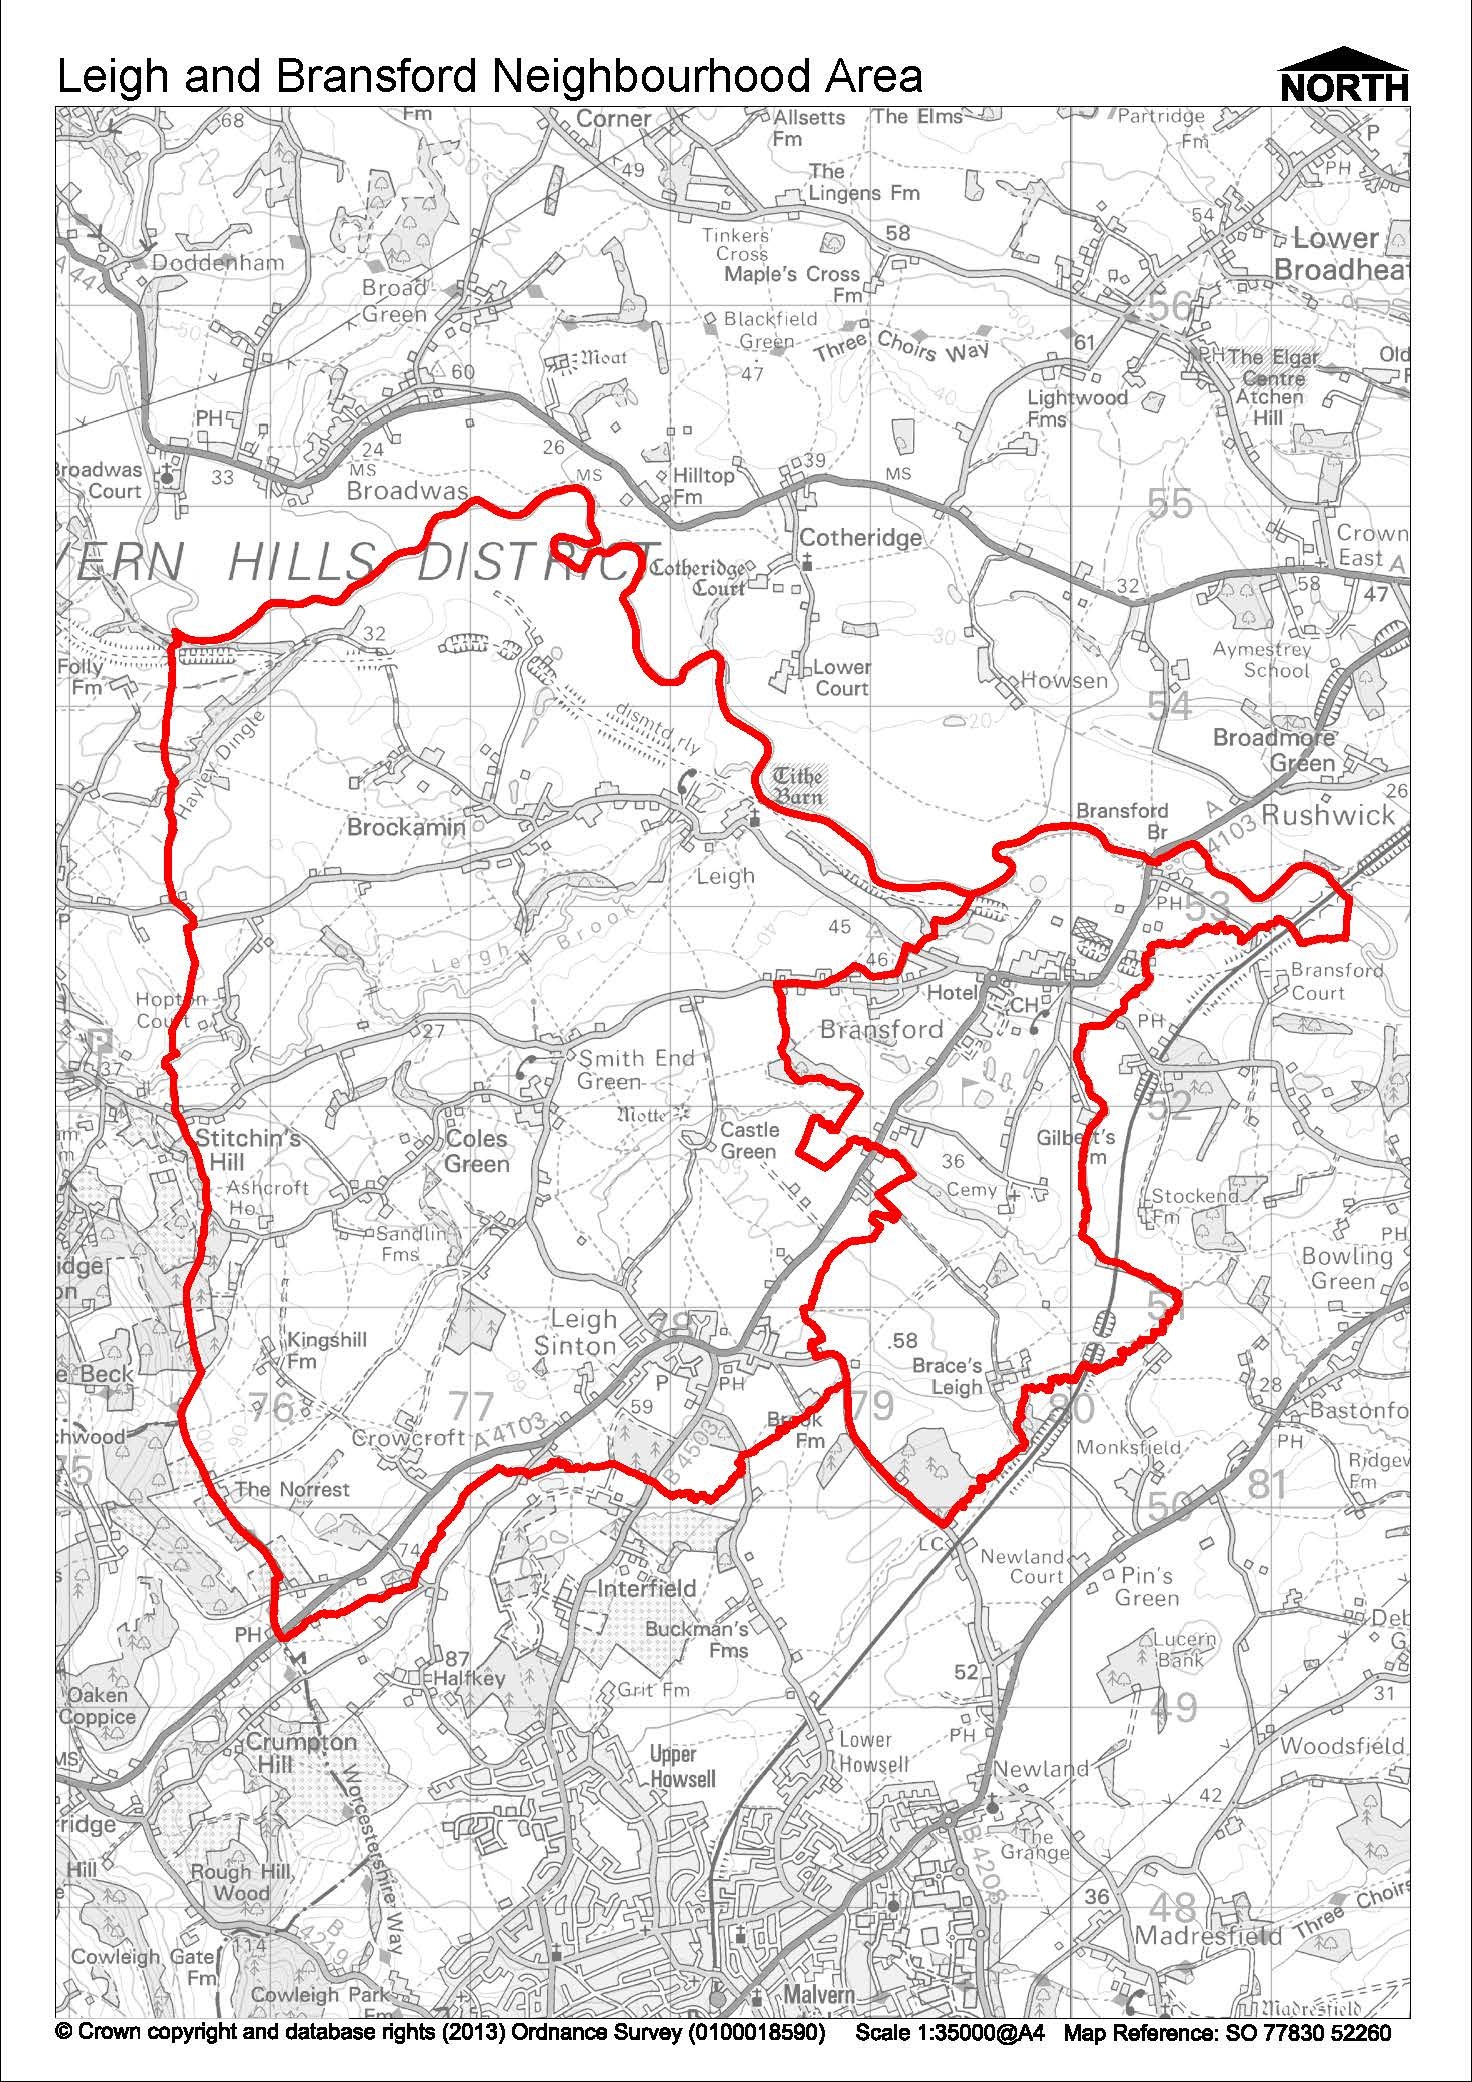 Map of Leigh and Bransford designated area